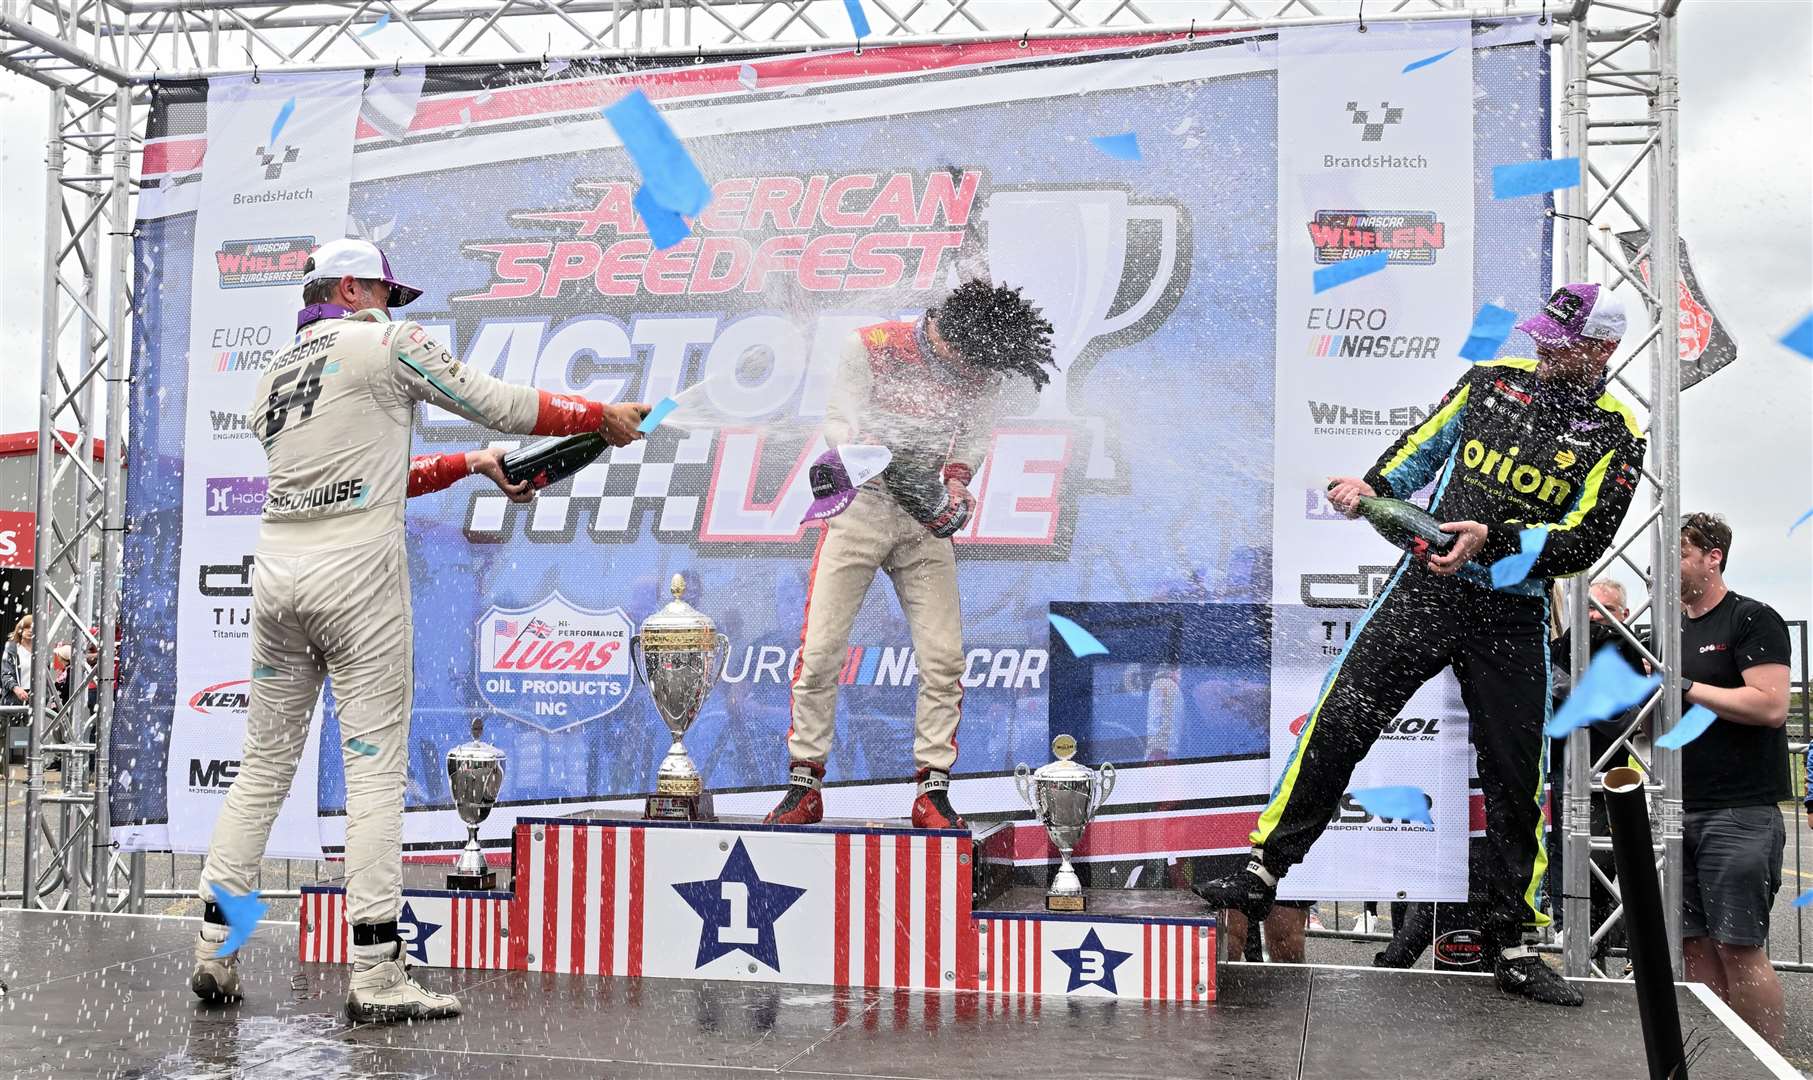 Hezemans, centre, celebrates winning Sunday’s EuroNASCAR Pro race, getting a champagne soaking from Lucas Lasserre and Martin Doubek. Picture: Simon Hildrew